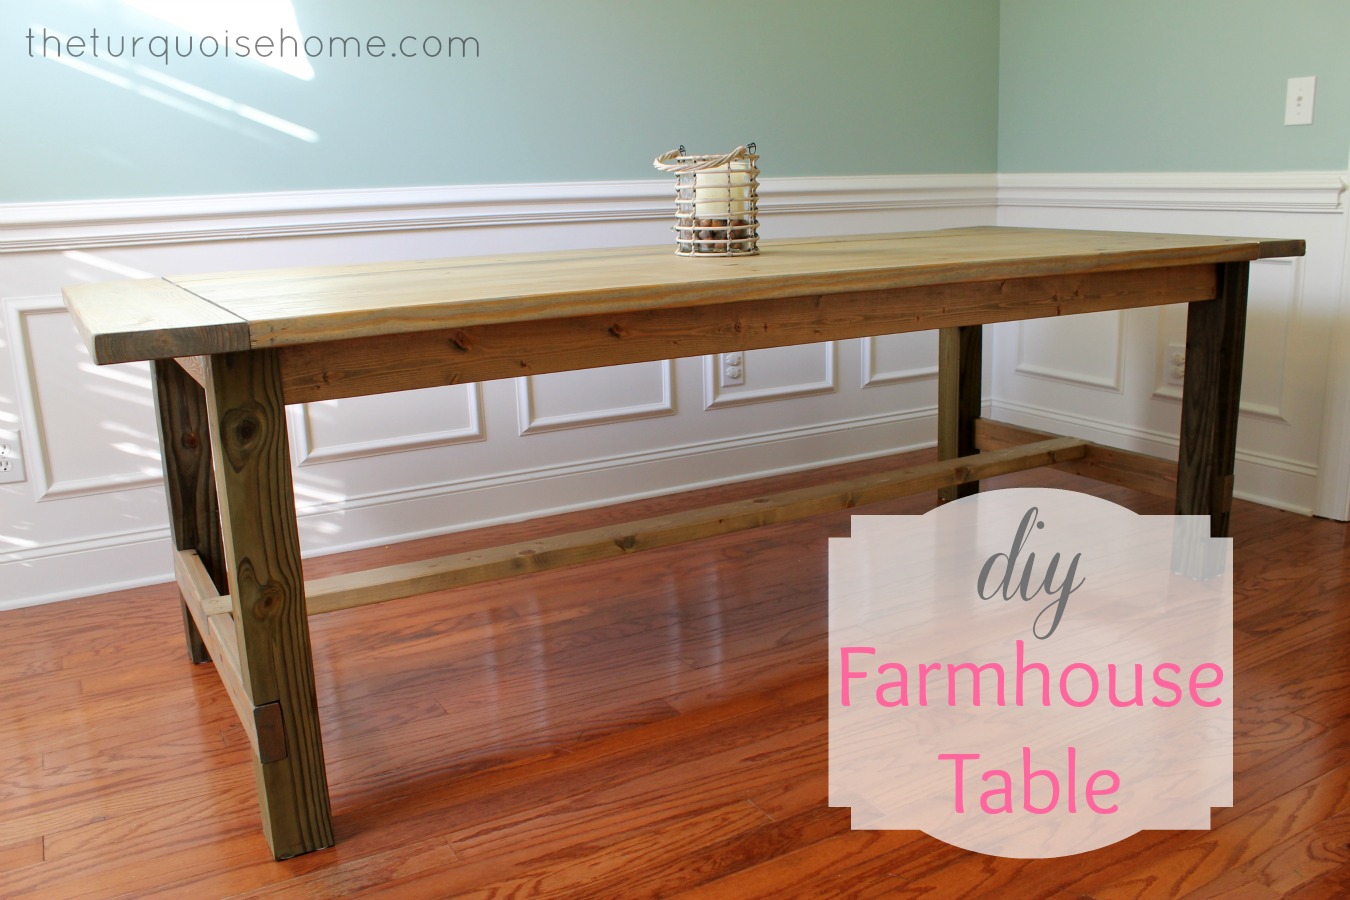  improved farmhouse table details tommy ellie farmhouse table details